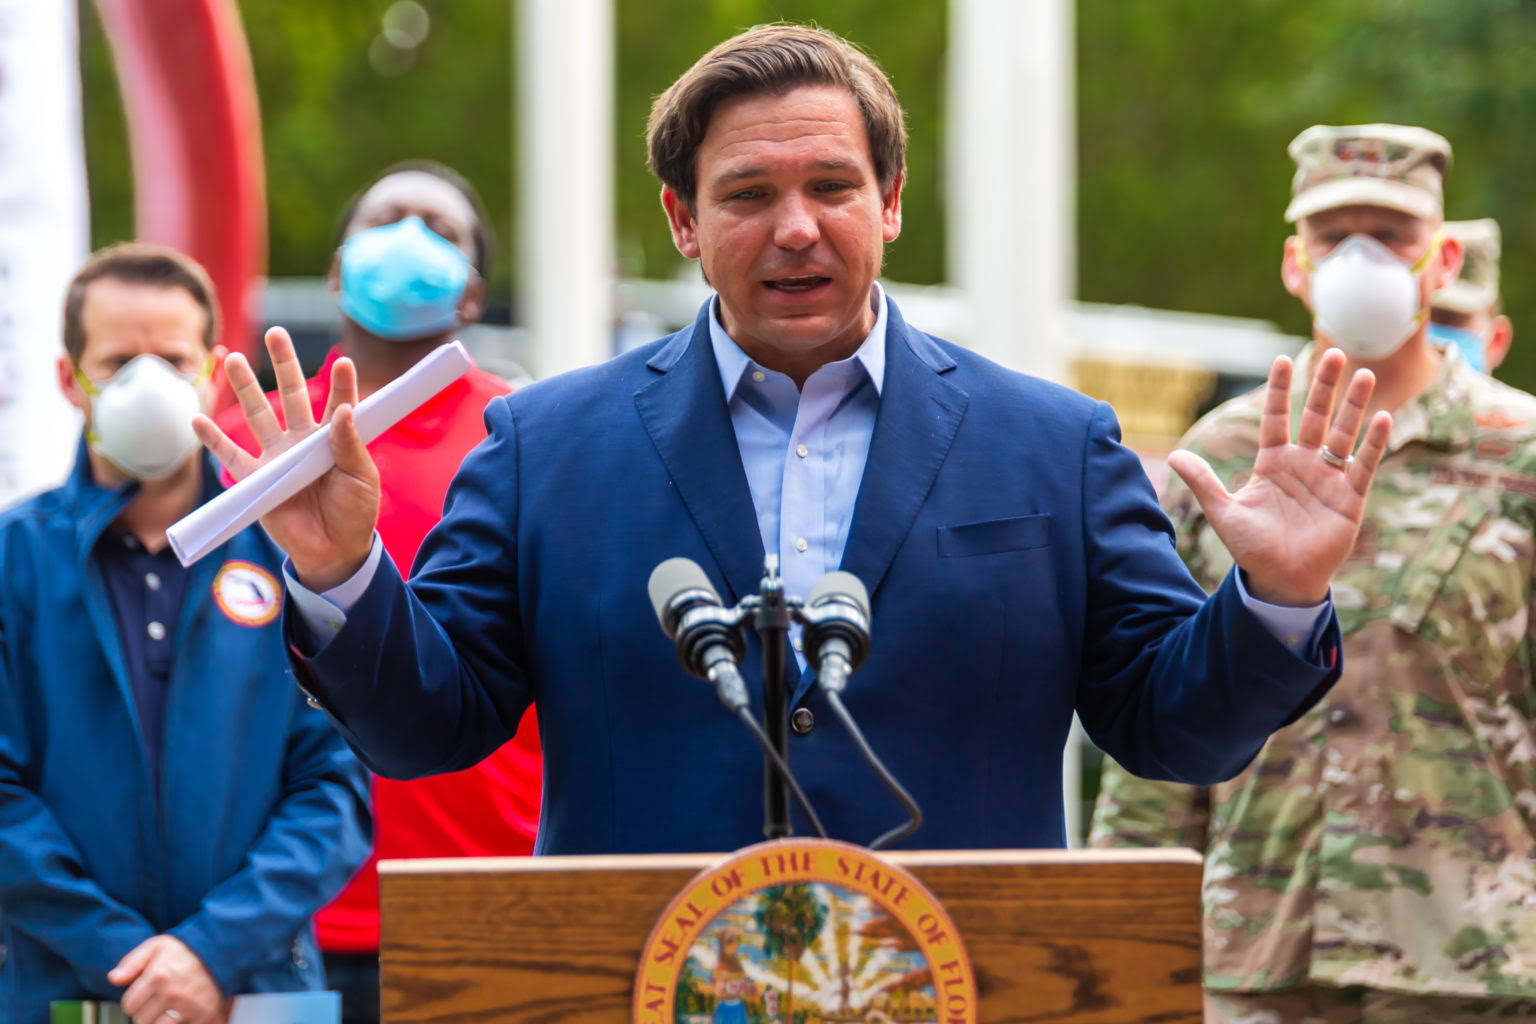 DeSantis Puts Dems in Their Place